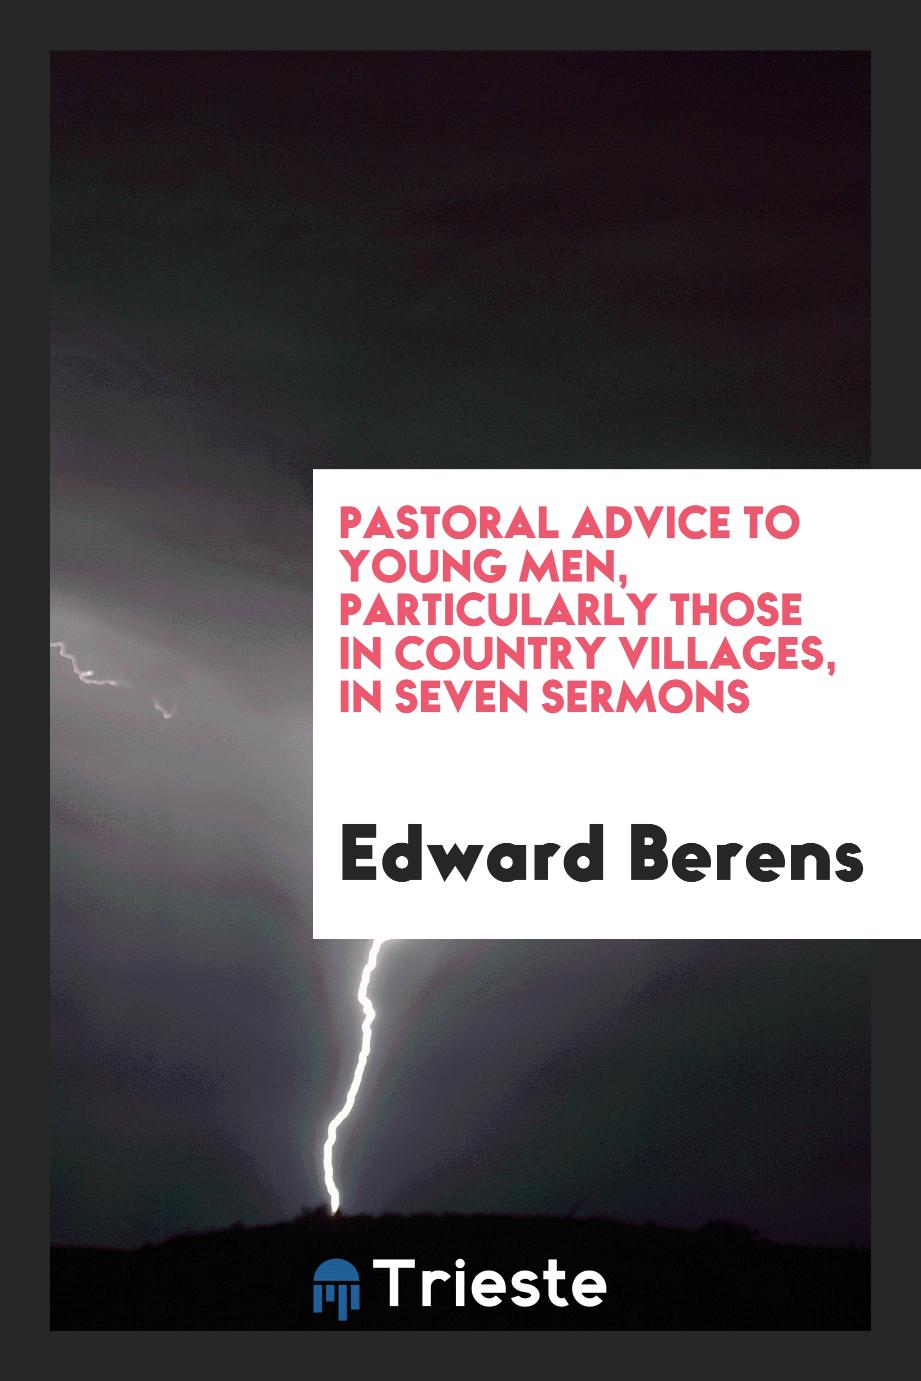 Pastoral advice to young men, particularly those in country villages, in seven sermons